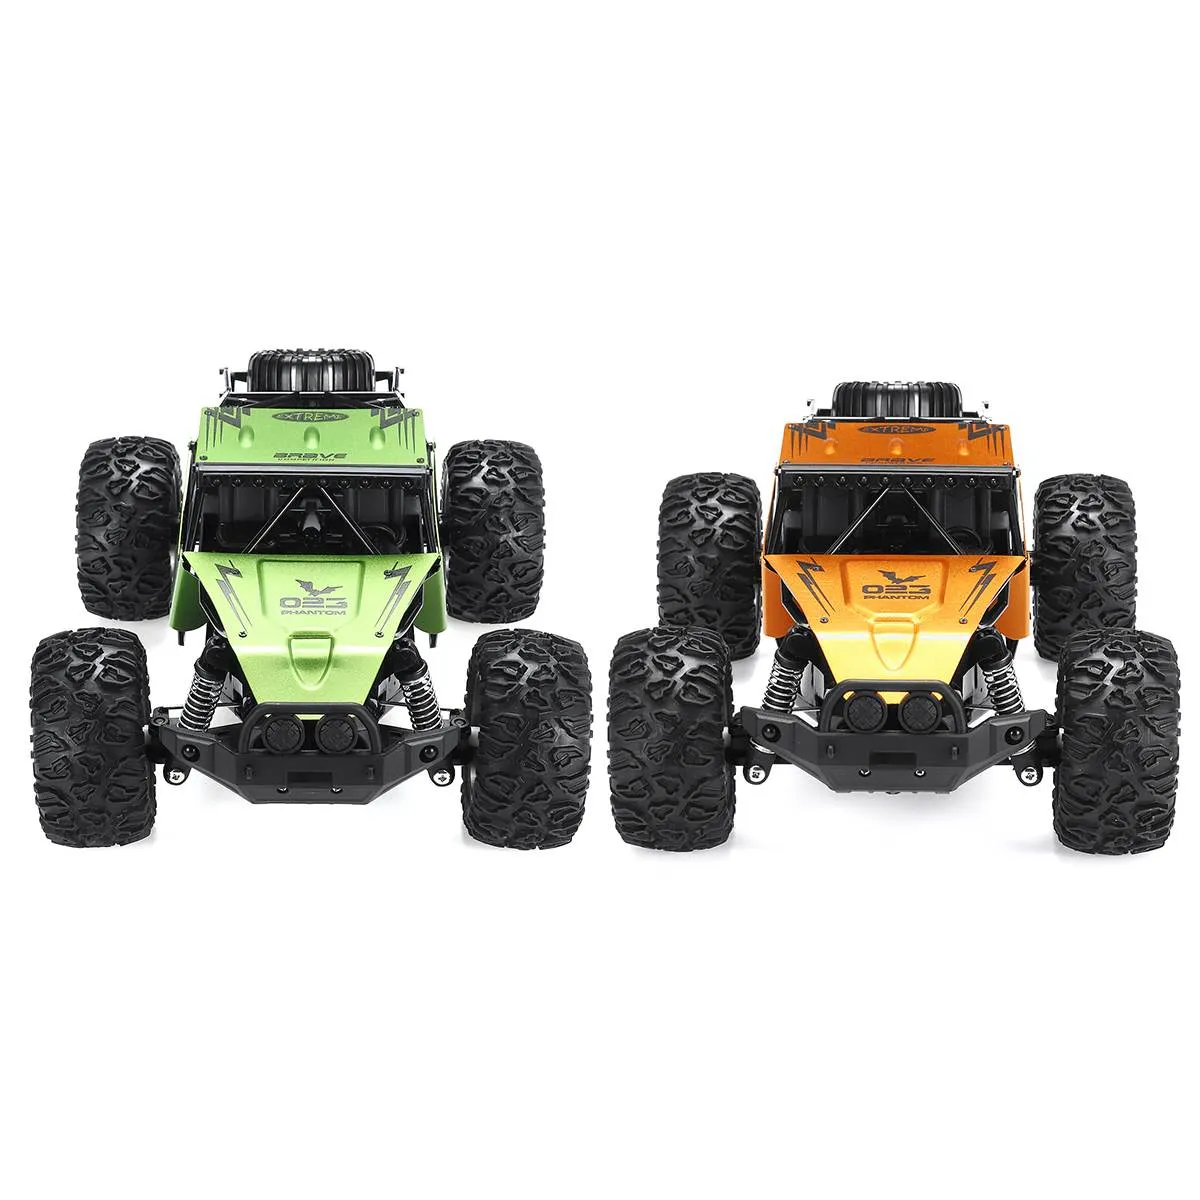 1:12 60Km/h RC Remote Control Off Road Cars Vehicle 2.4Ghz Crawlers Electric Monster RC car Toy for Children Gift